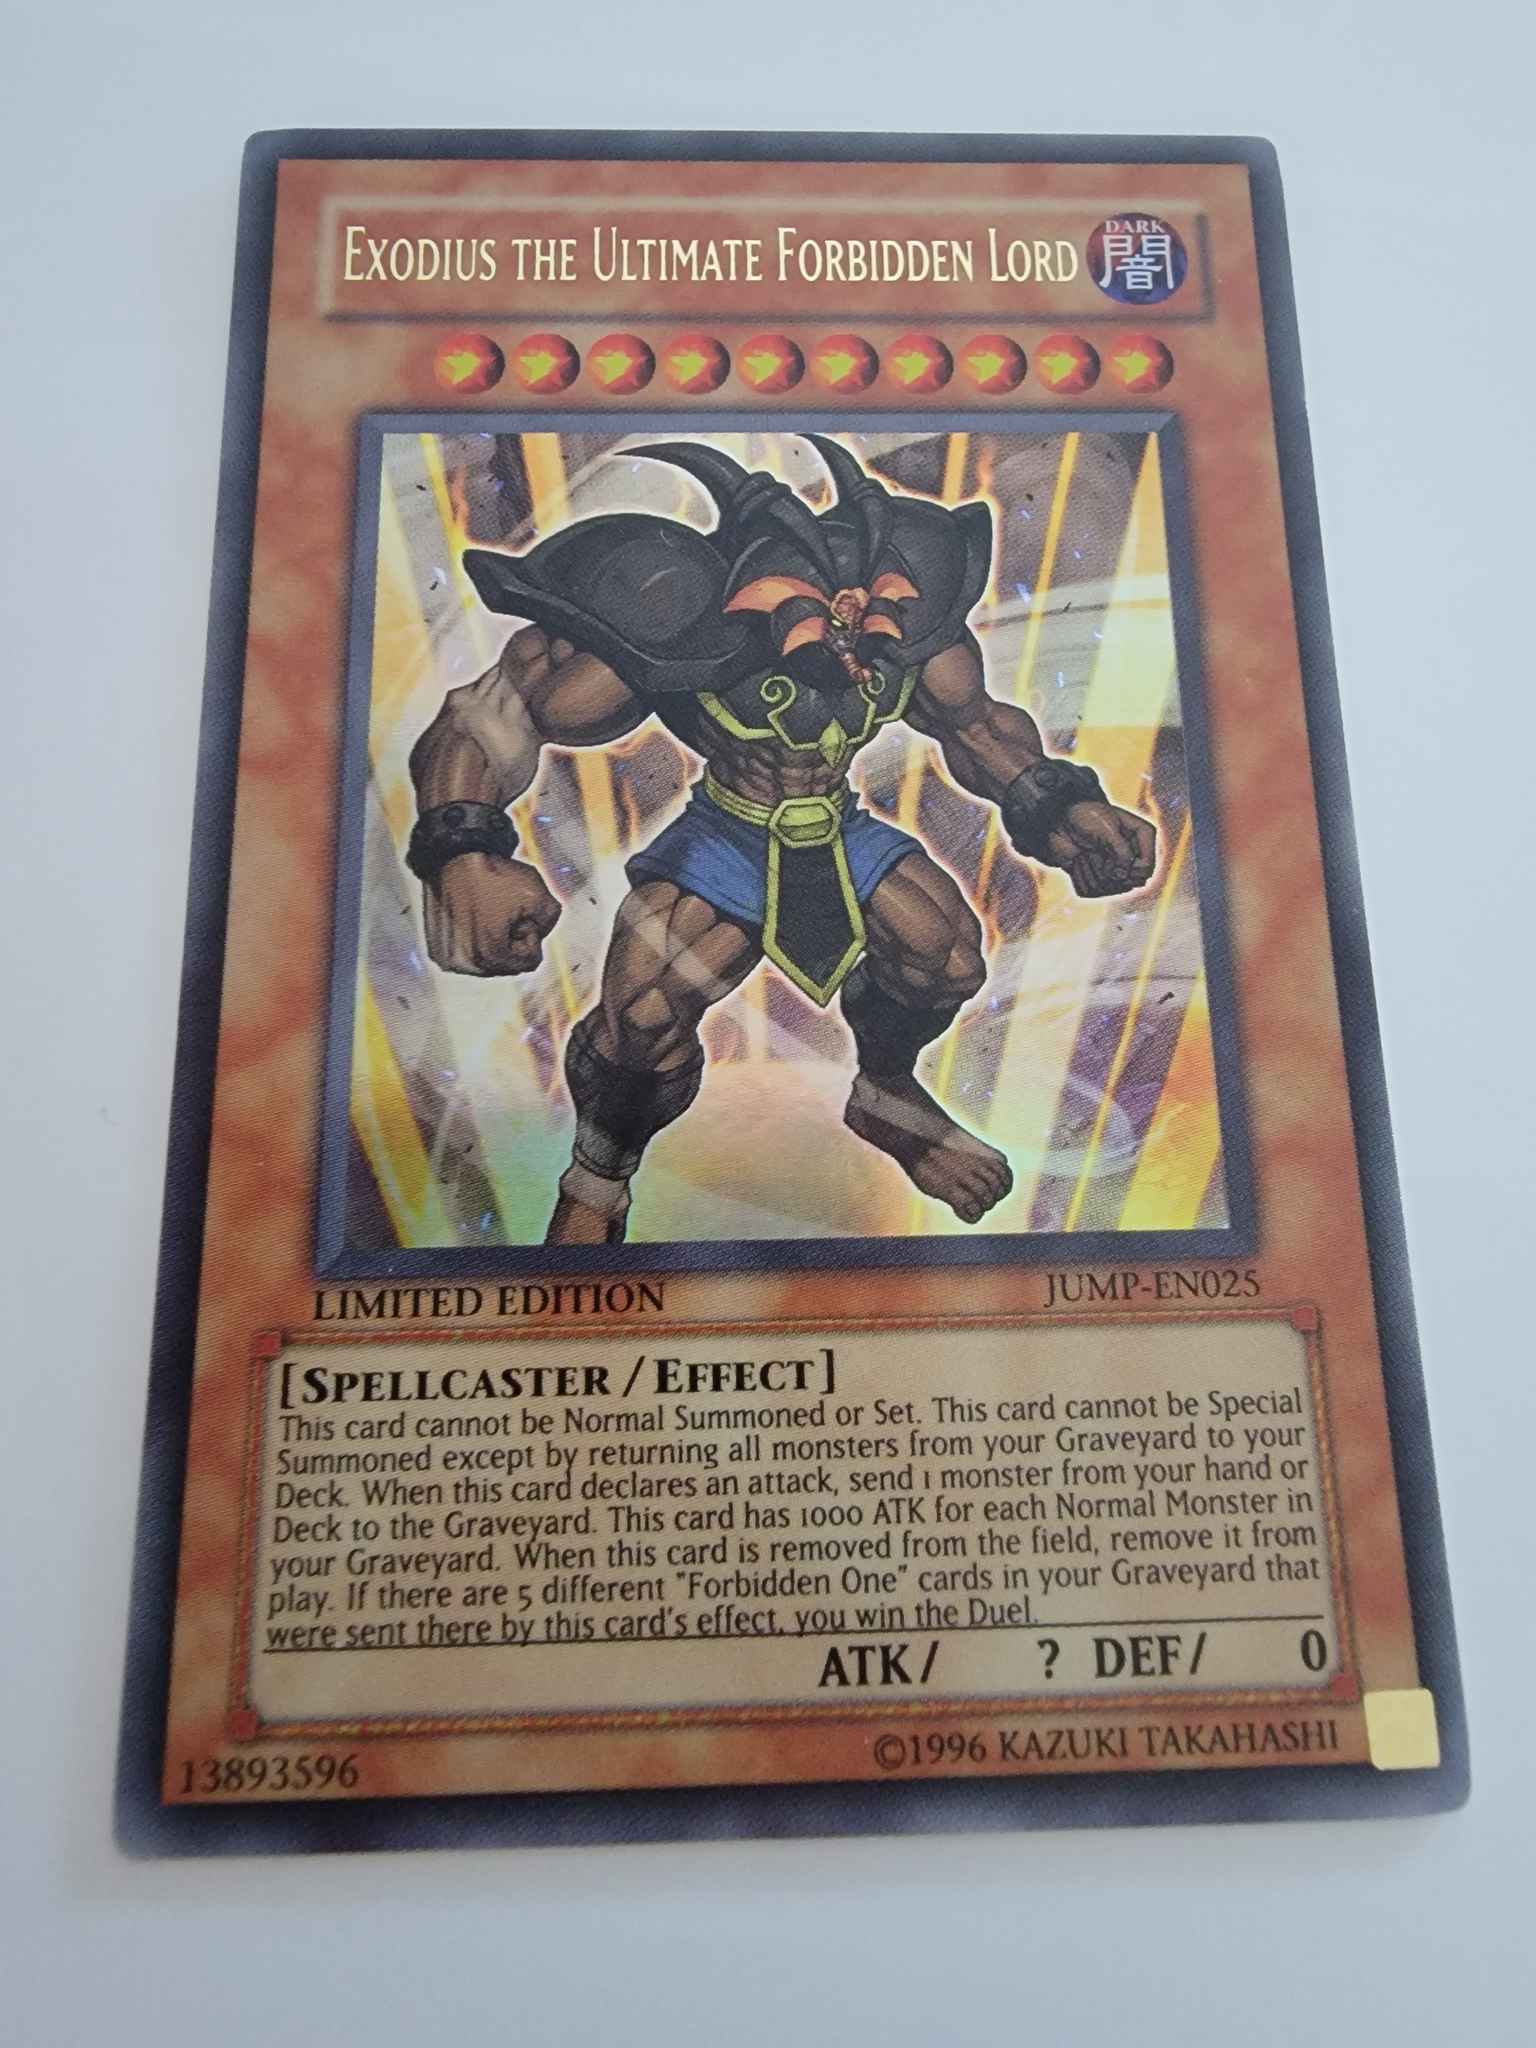 Exodius The Ultimate Forbidden Lord JUMP-EN025 Ultra Rare Limited Edition Yugioh